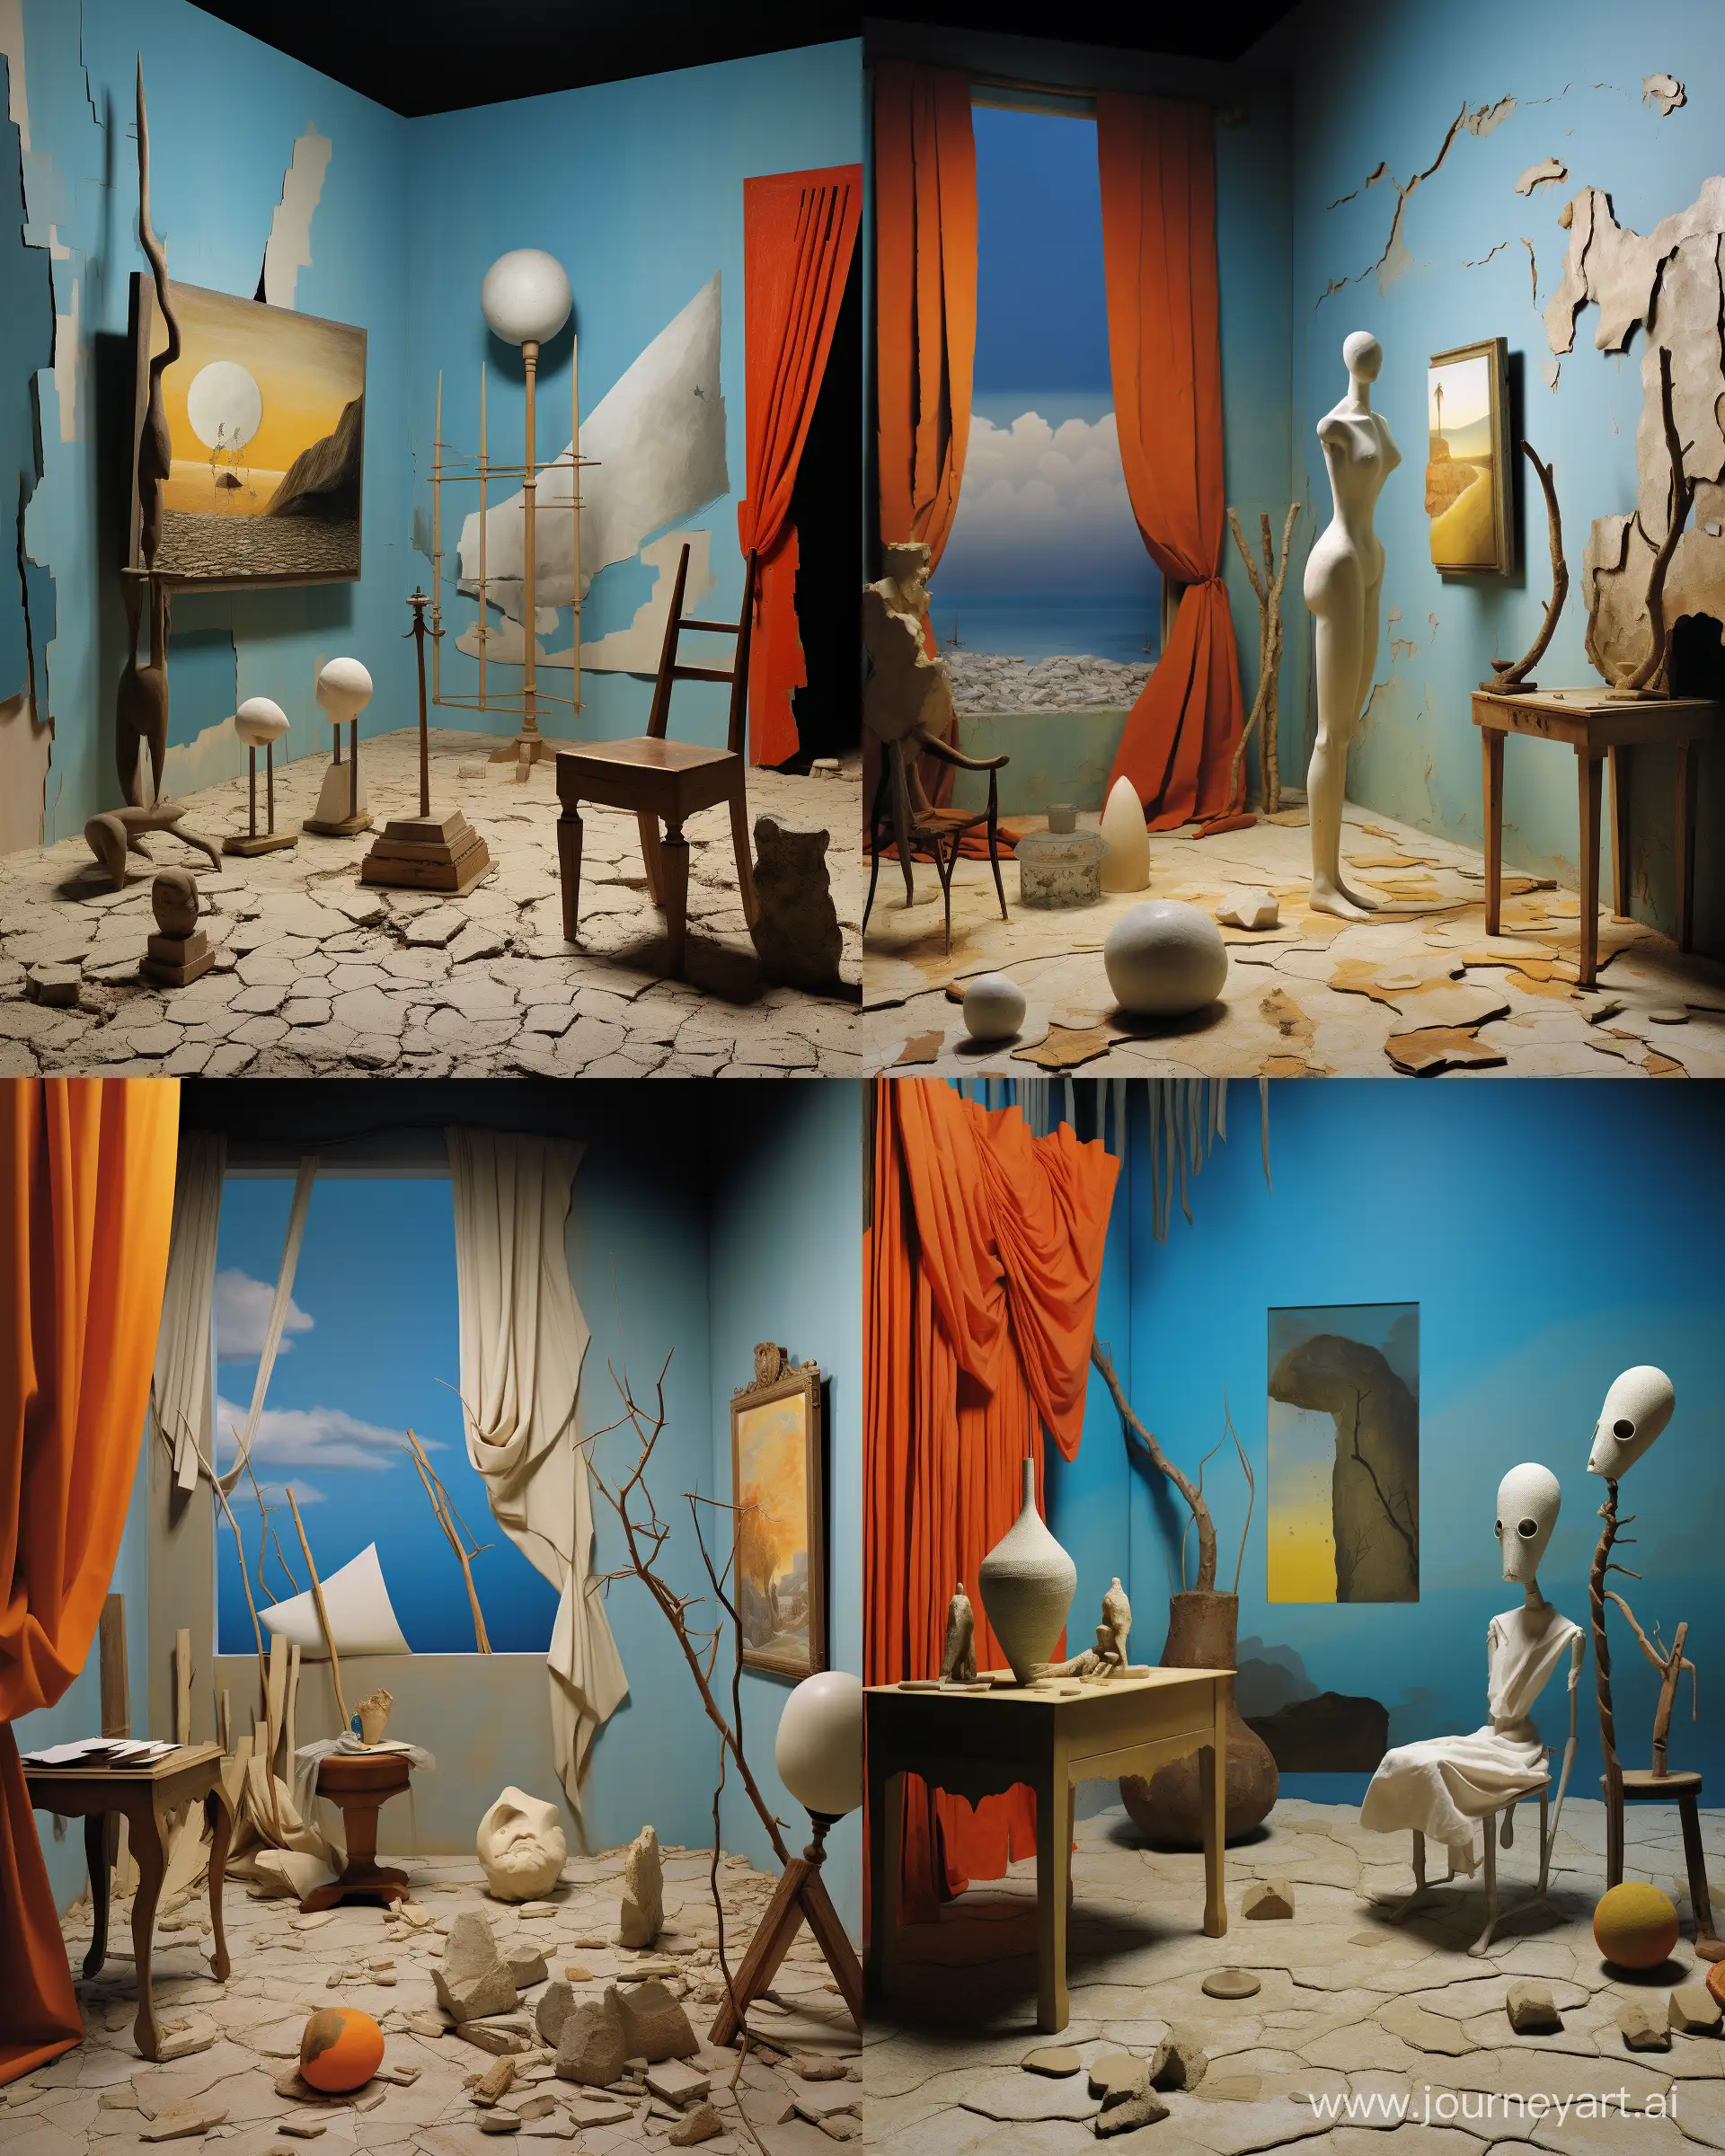 Surrealist-Sculpture-Room-with-Max-Ernst-Characters